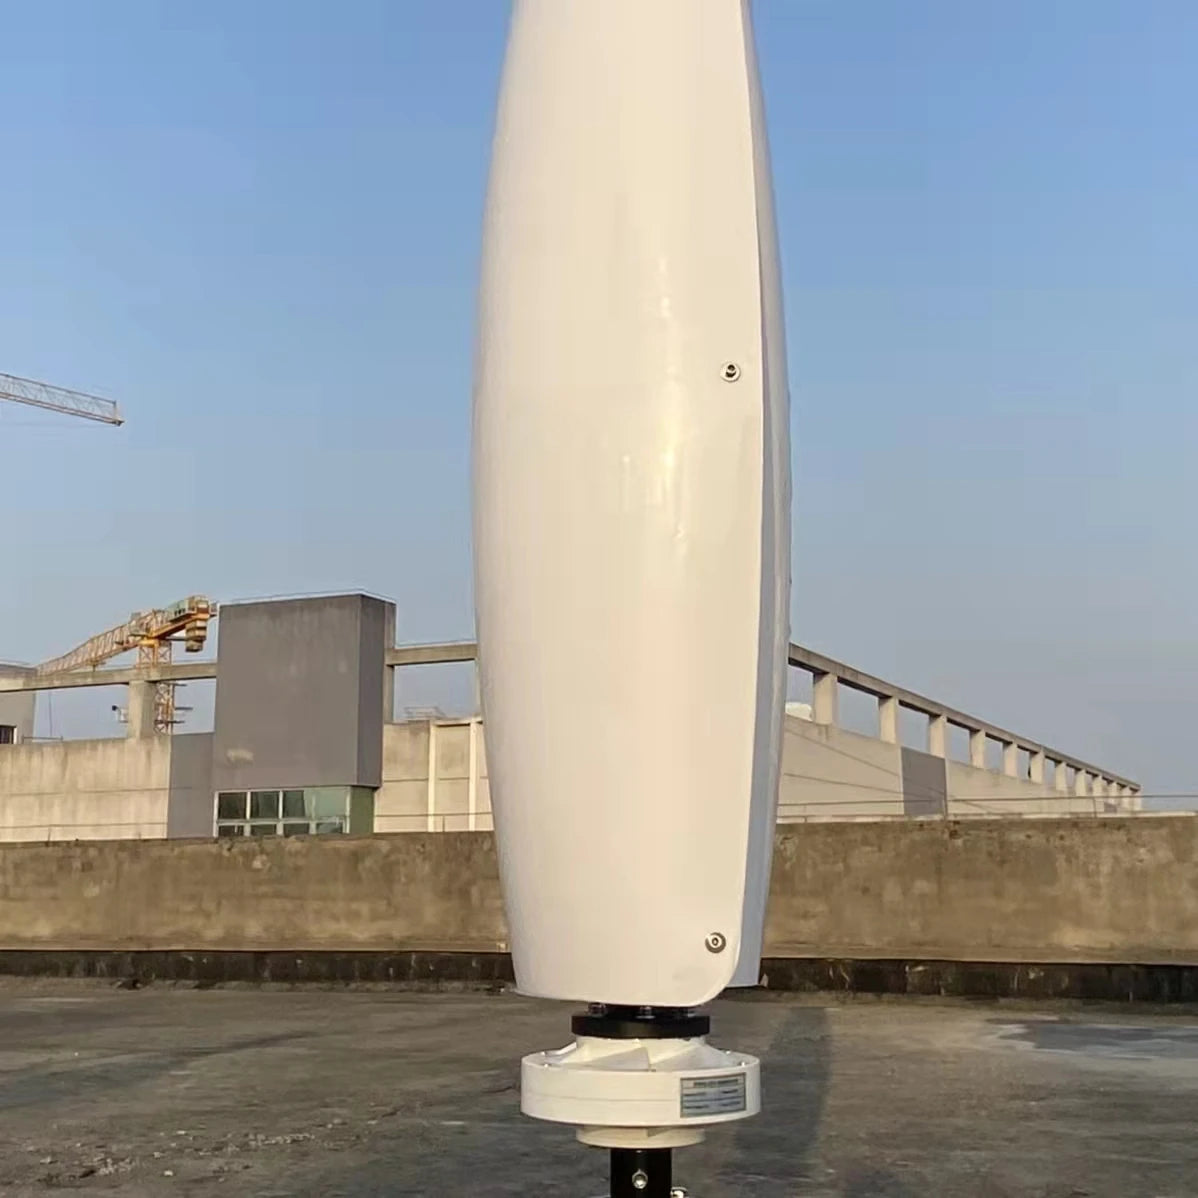 Wind Turbine Free Energy Windmill 10KW 12V-220V Vertical Axis Permanent Maglev Wind Turbine With Hybrid Controller